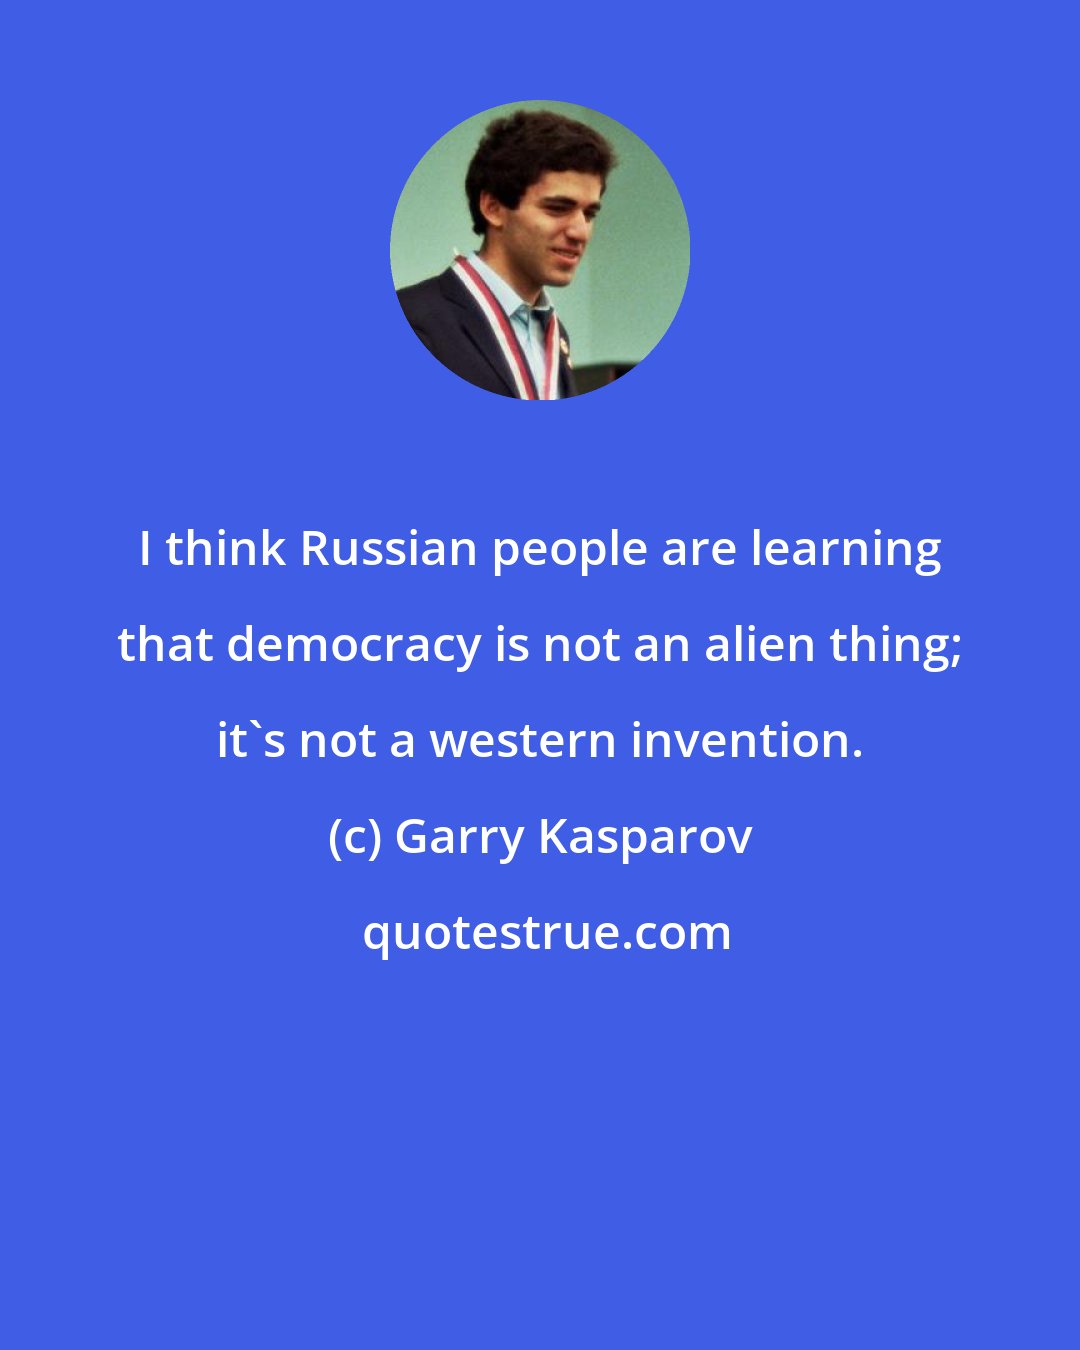 Garry Kasparov: I think Russian people are learning that democracy is not an alien thing; it's not a western invention.